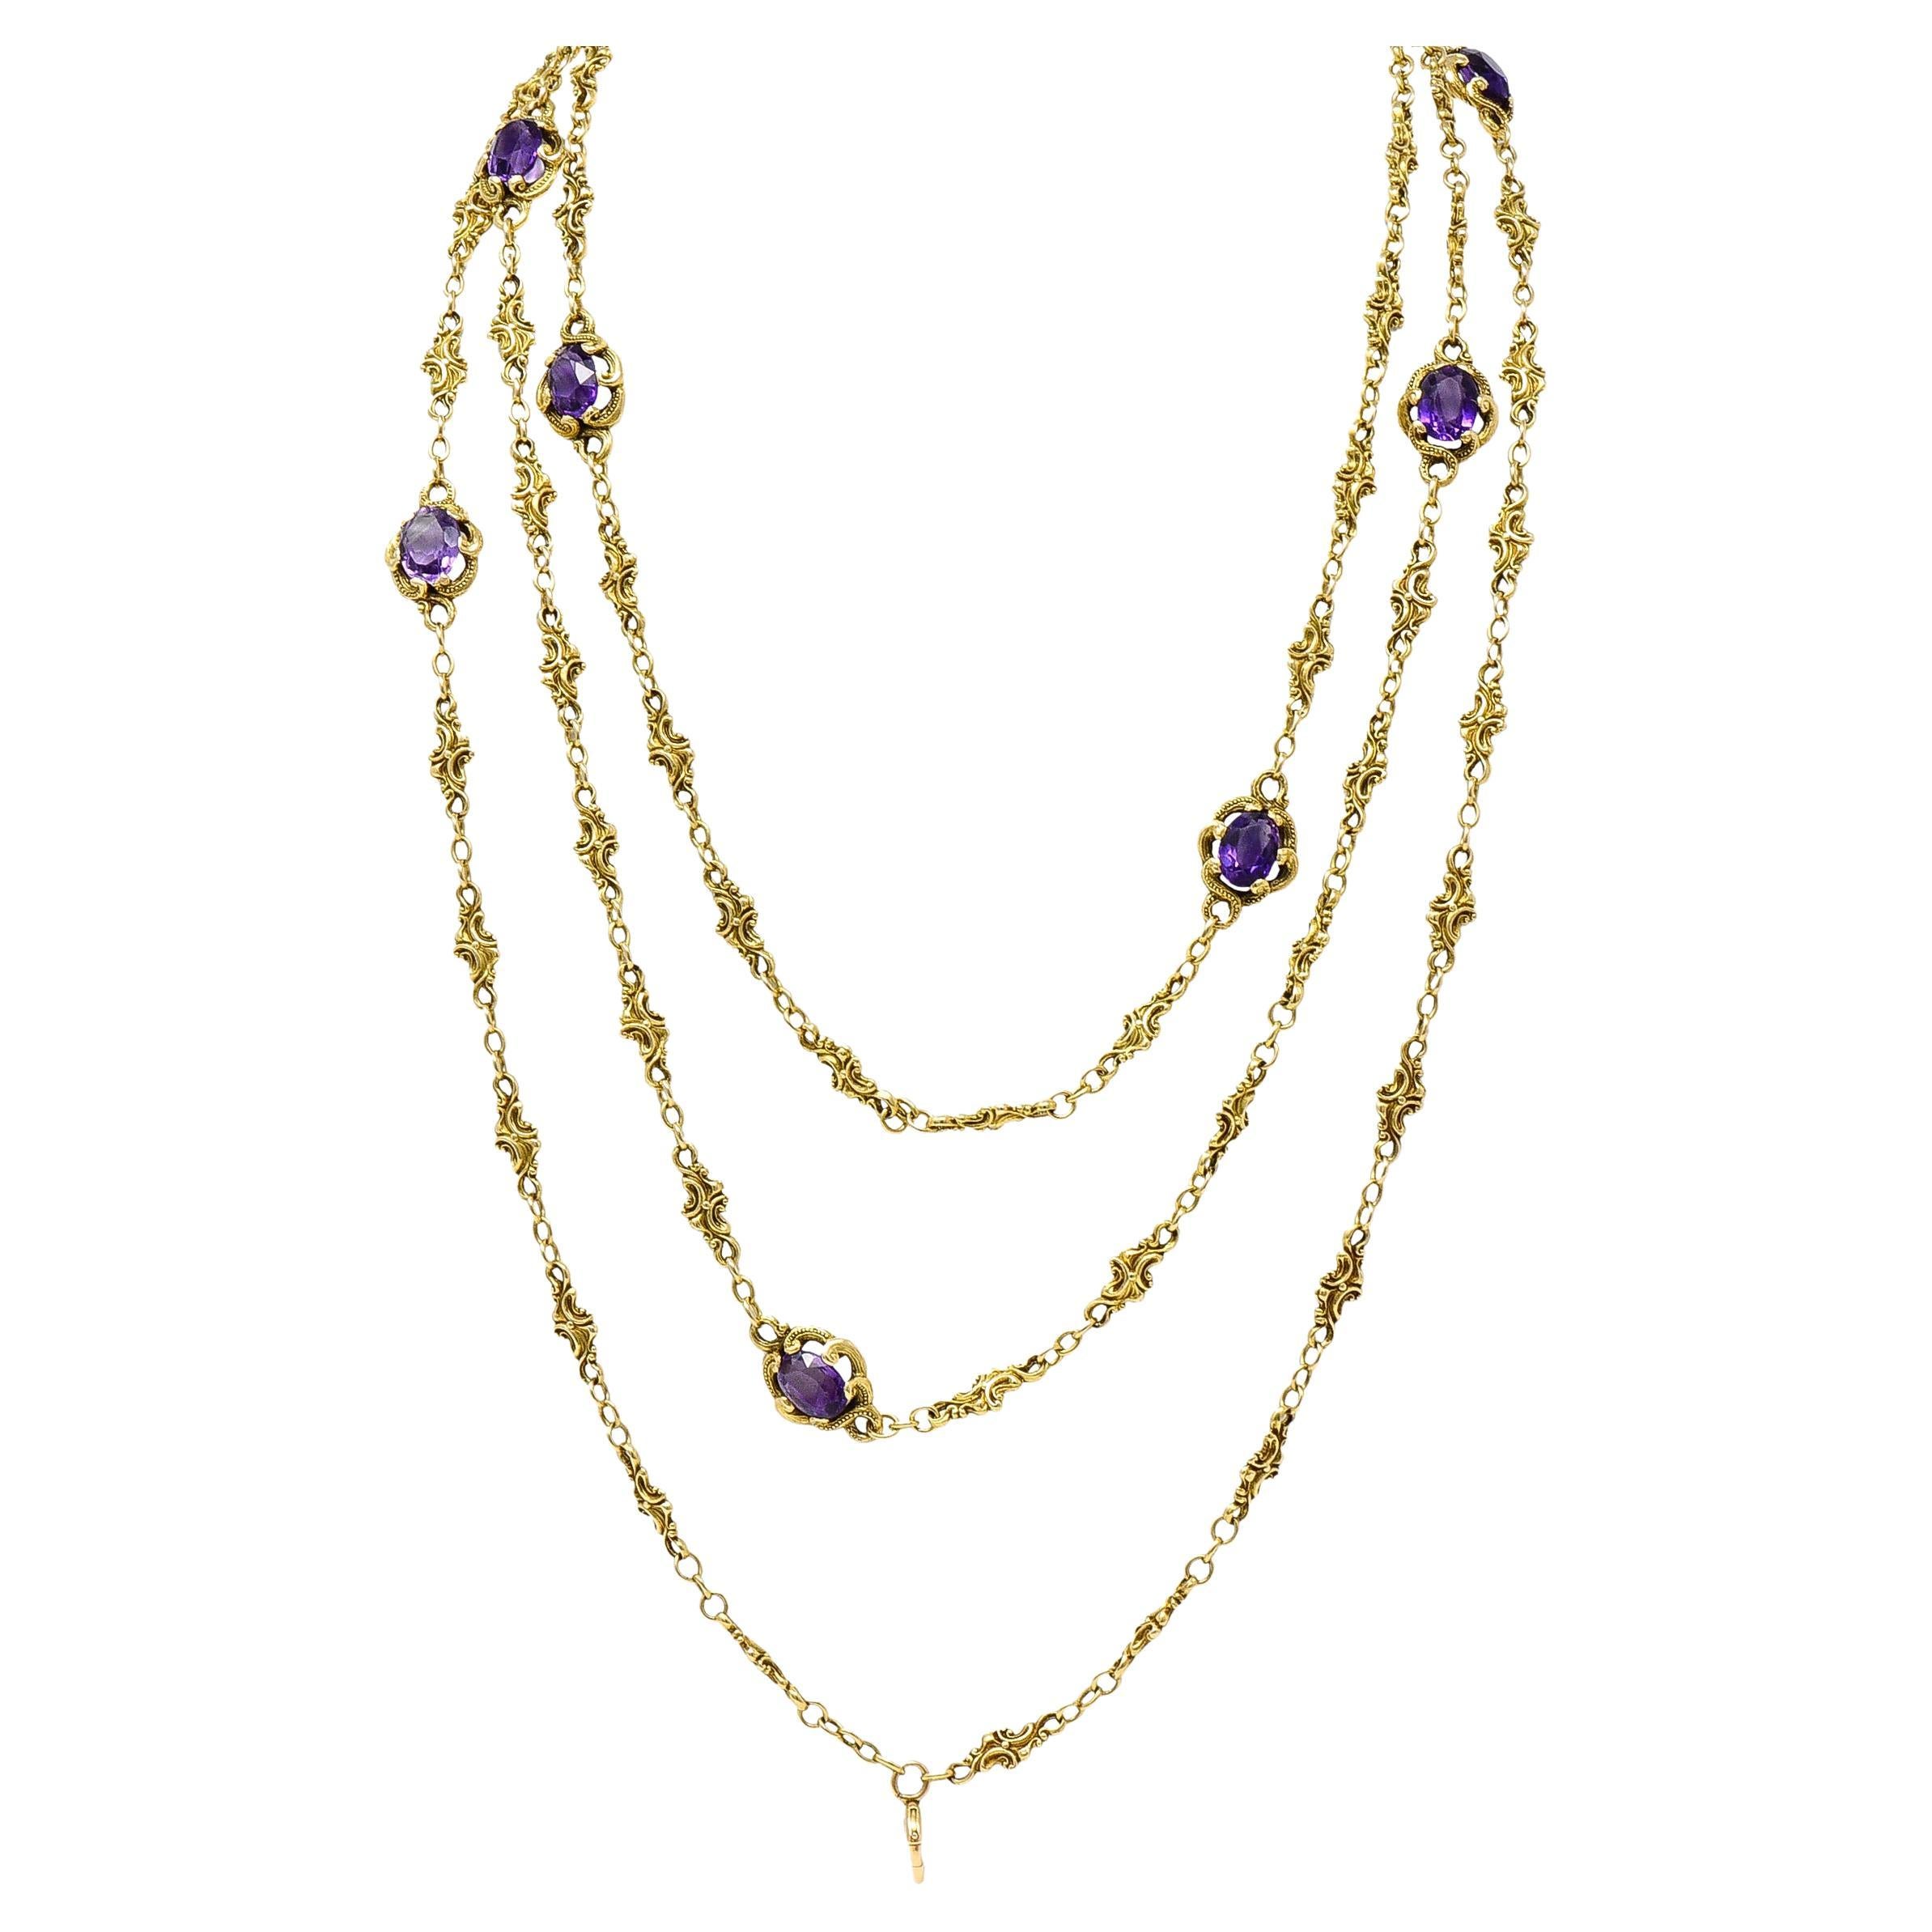 Victorian Amethyst 14 Karat Yellow Gold Scrolling Long Chain Necklace